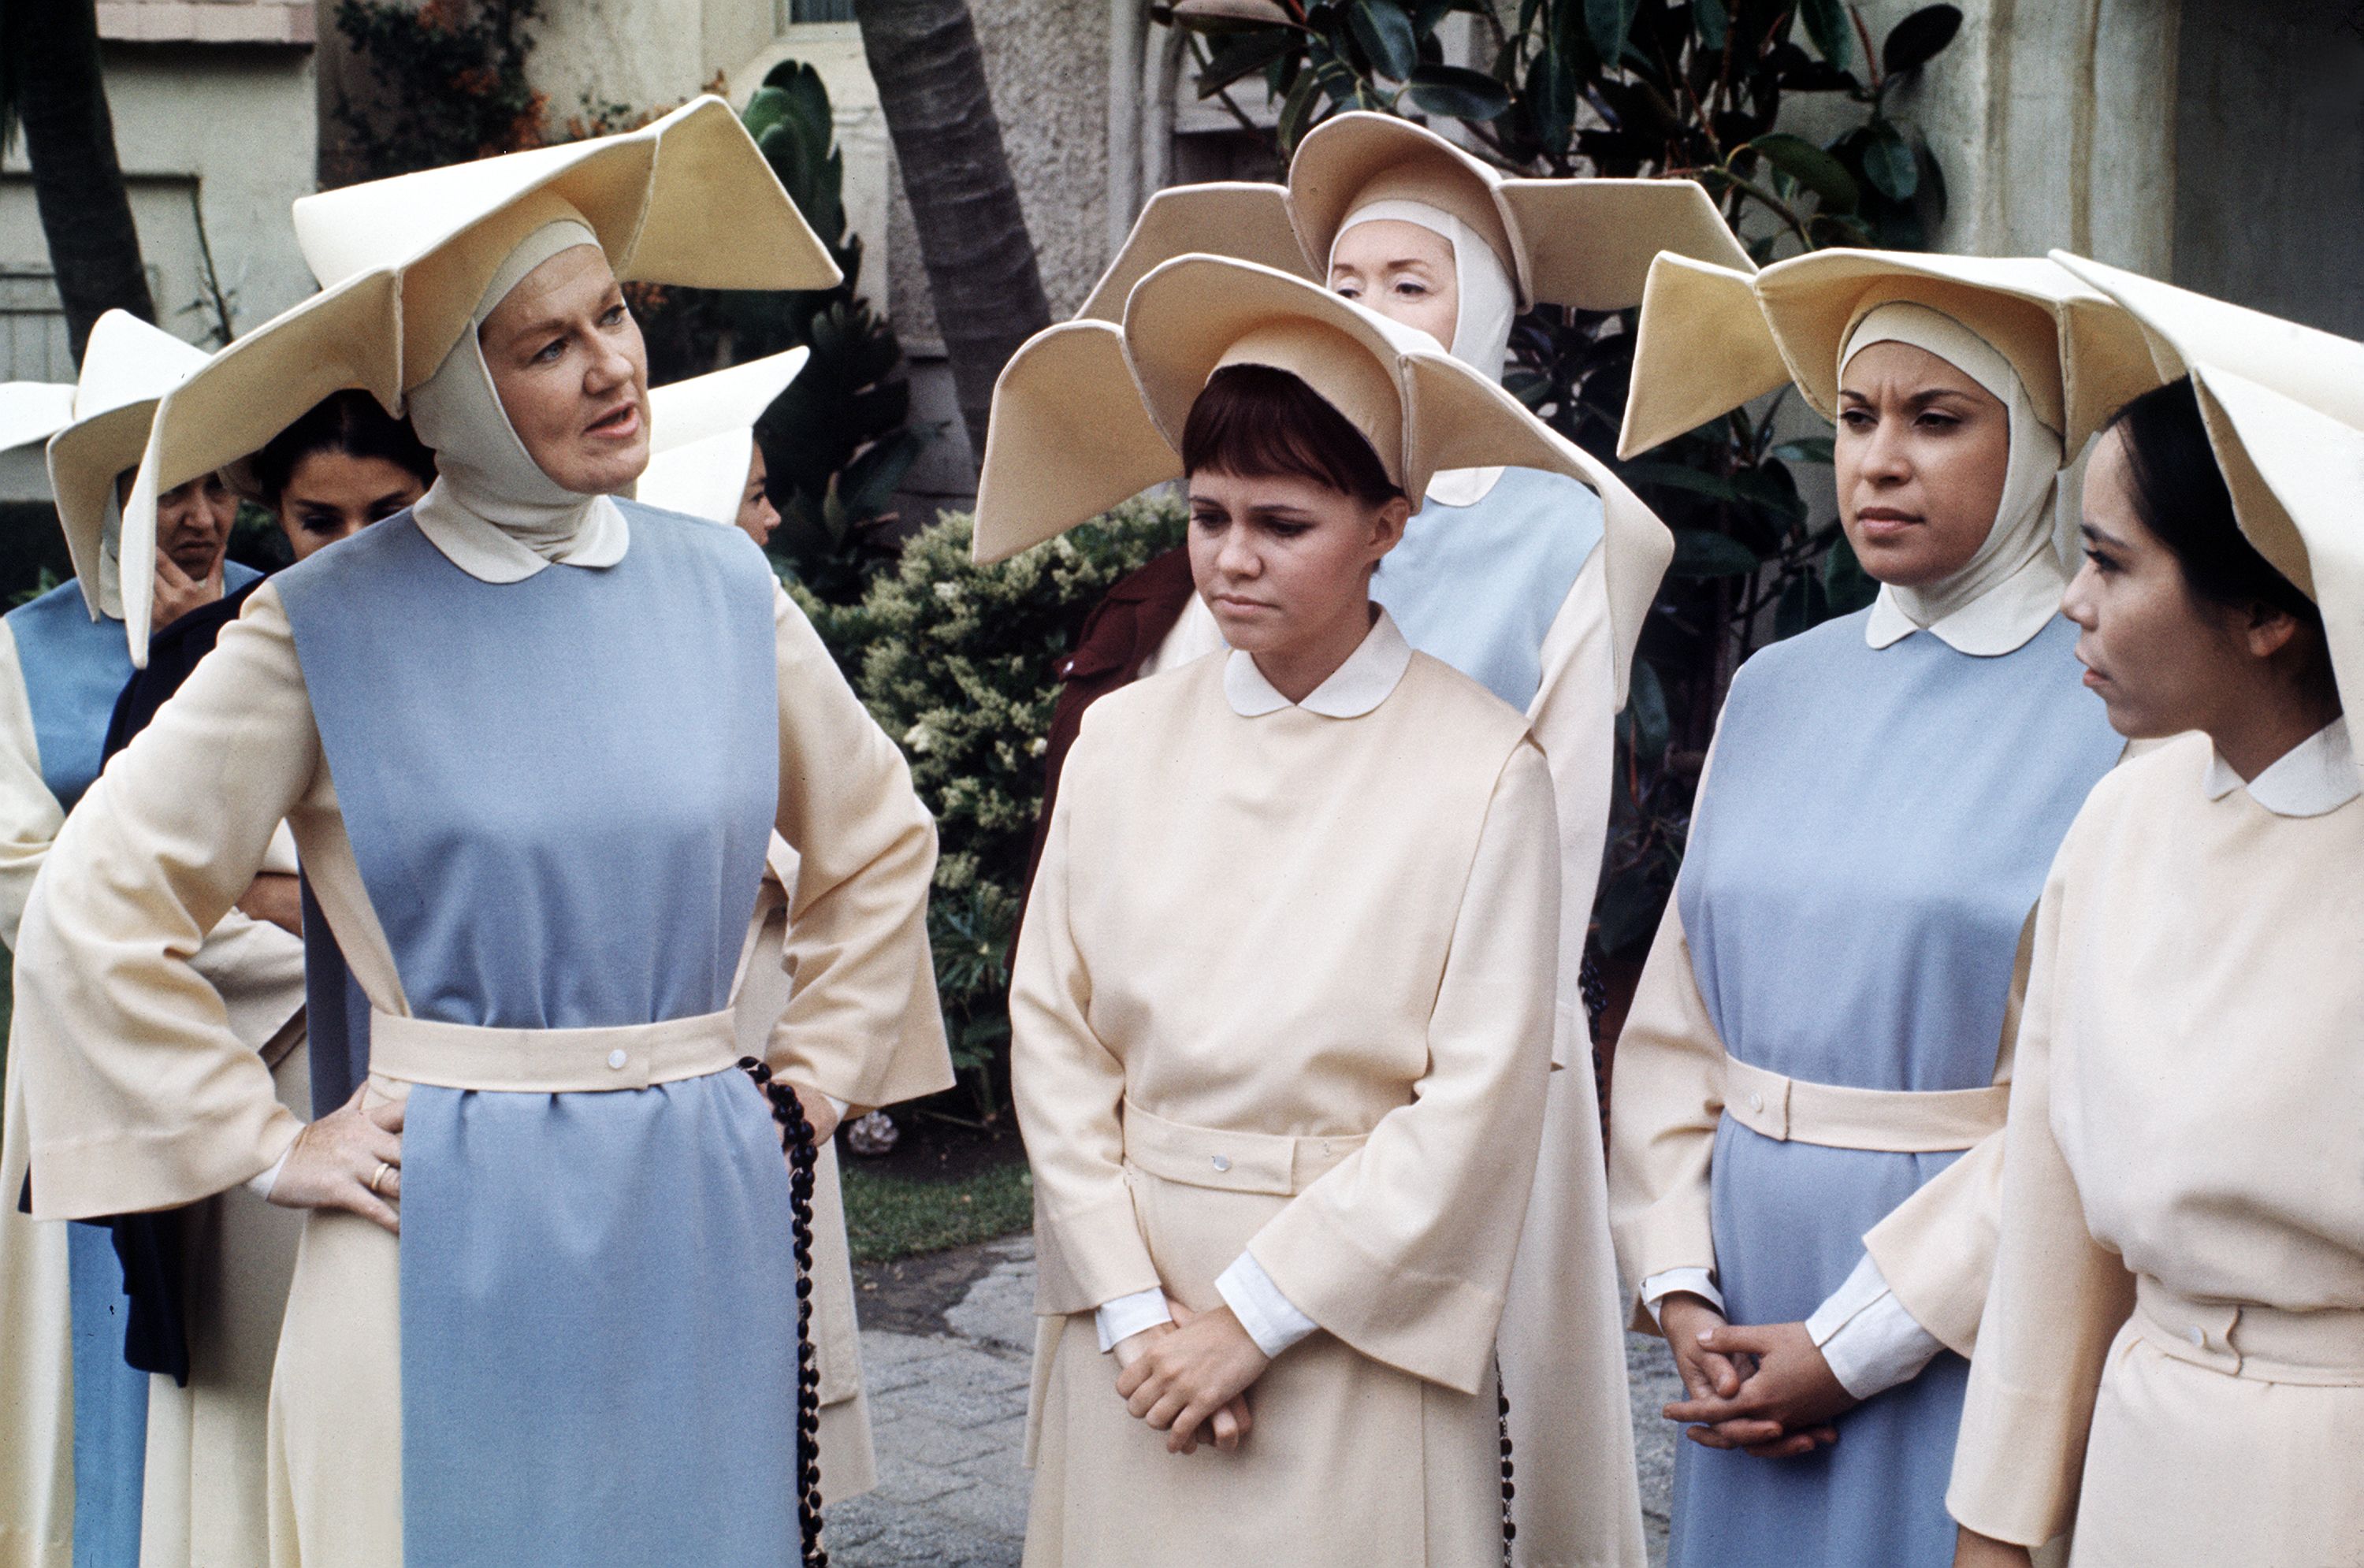 Sally Field Hated Being in the Flying Nun - The Flying Nun Turns 50